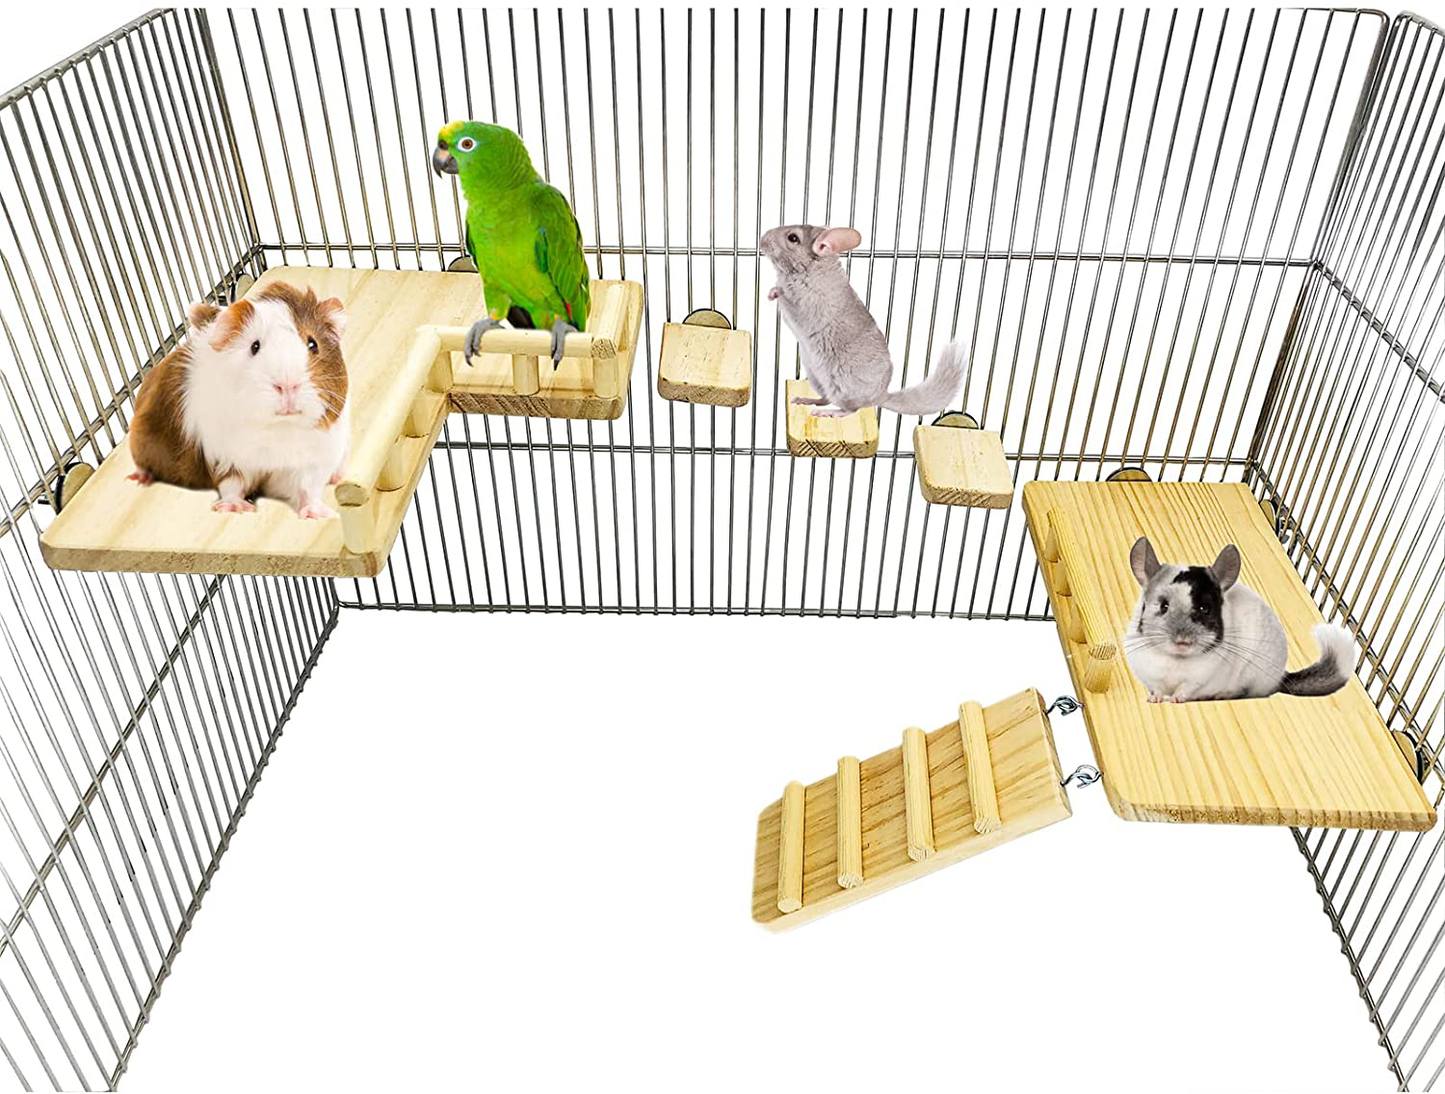 CAREUPET Squirrel Hamster Wooden Platform Jumping Board Climbing Ladder,Bird Perches Cage Toys,Natural Wooden Gerbil Standing Platform, Chinchilla Cage Accessories